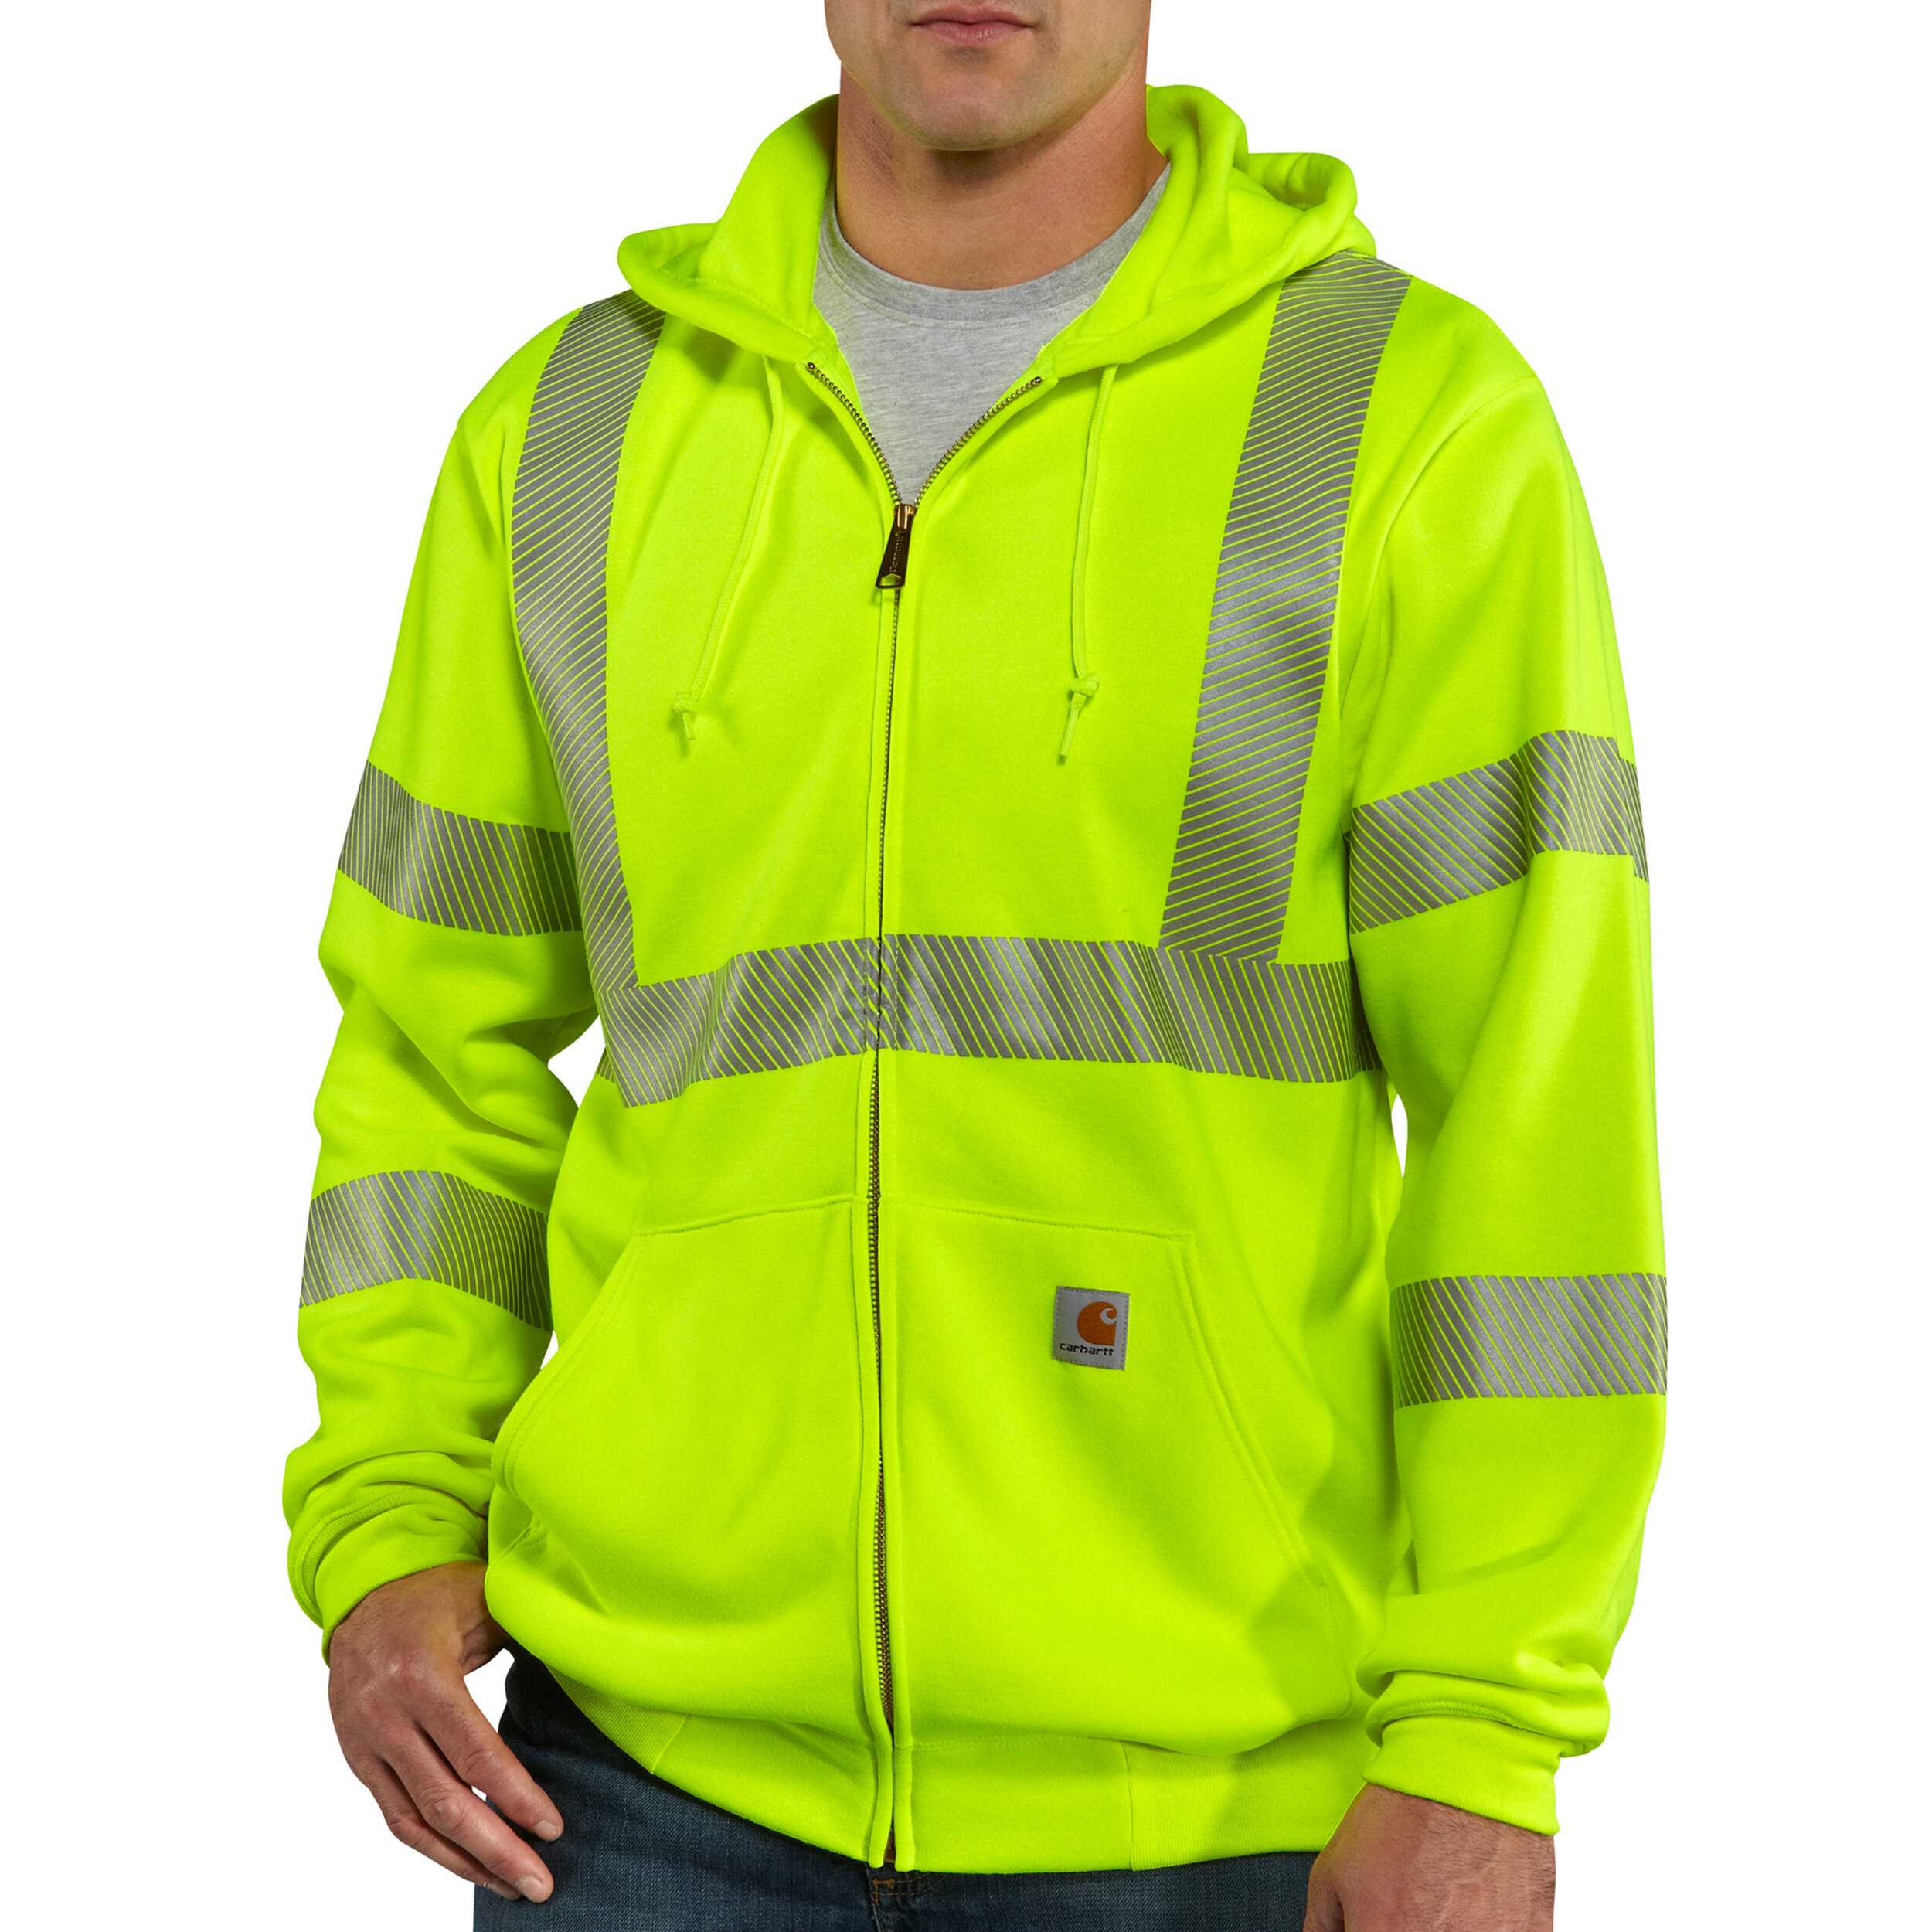 Carhartt Men's High-Visibility Zip-Front Class 3 Thermal-Lined Sweatshirt —  Harvey Milling